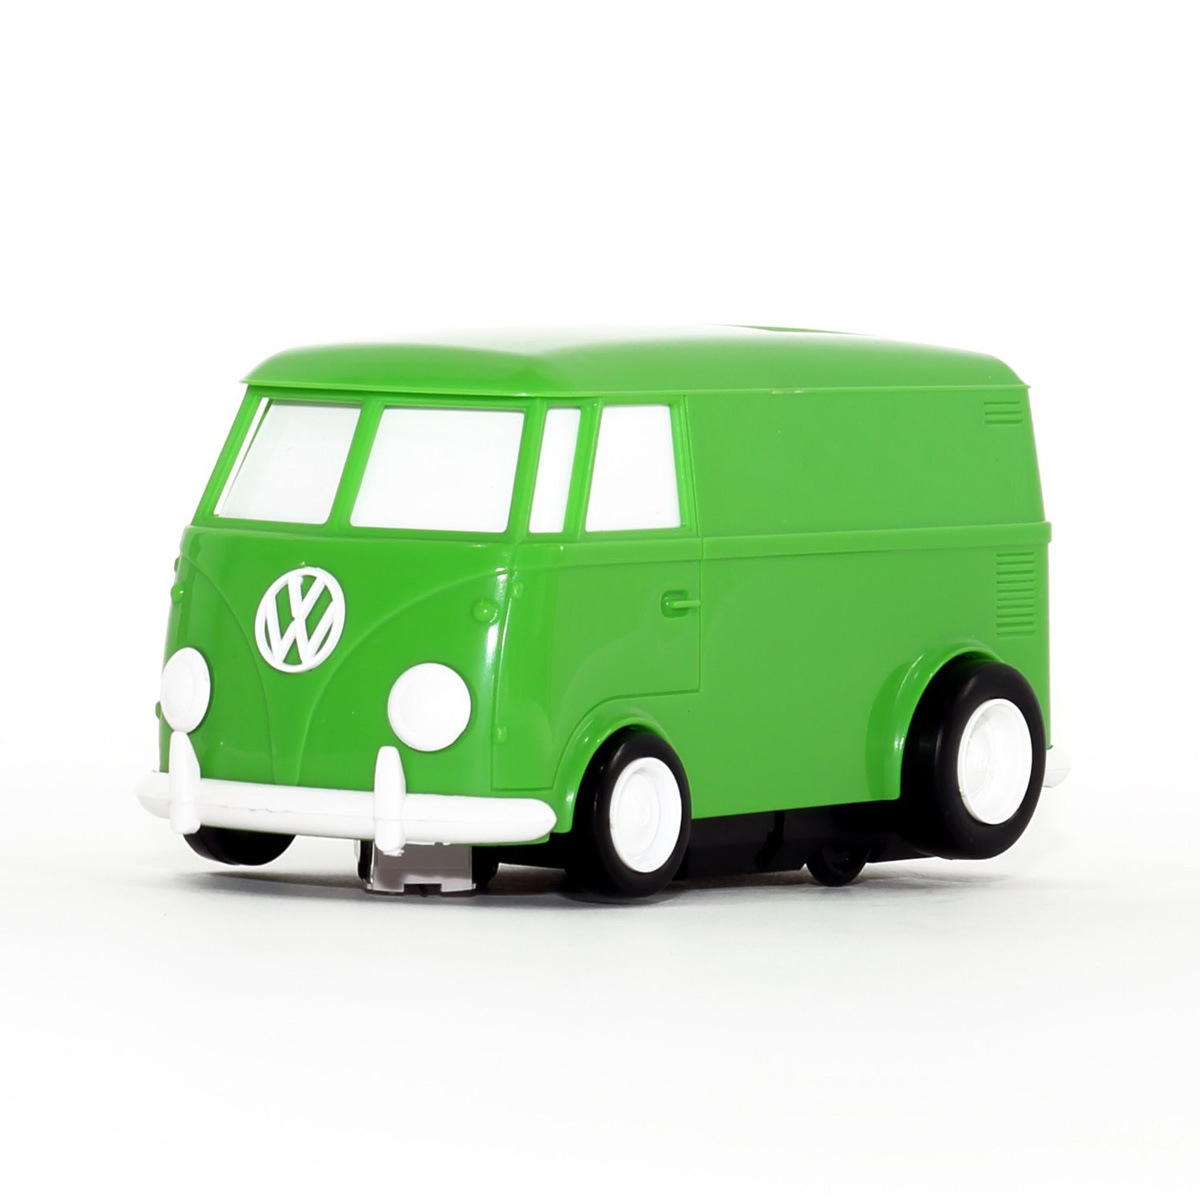 Record Runner VW Bus Portable SelfContained Vinyl Record Player The Green Head